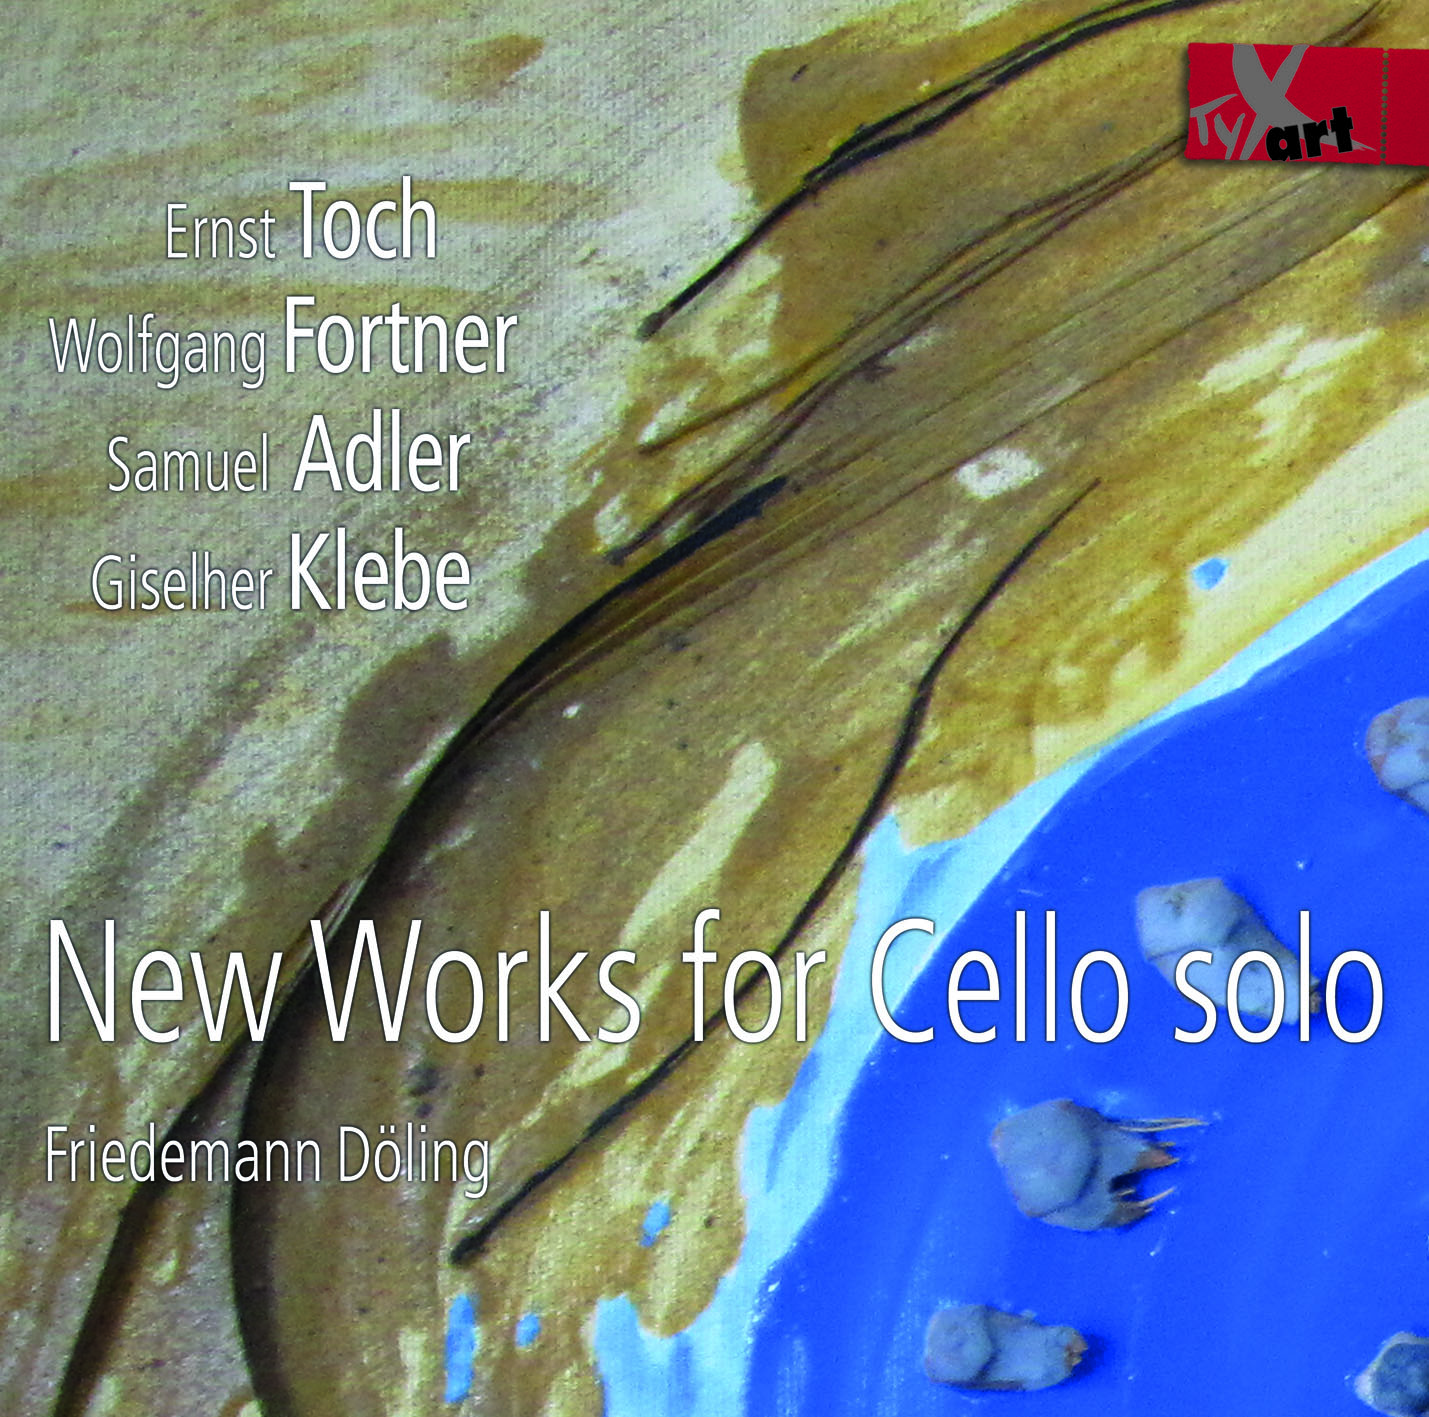 New Works for Cello solo - Friedemann Döling